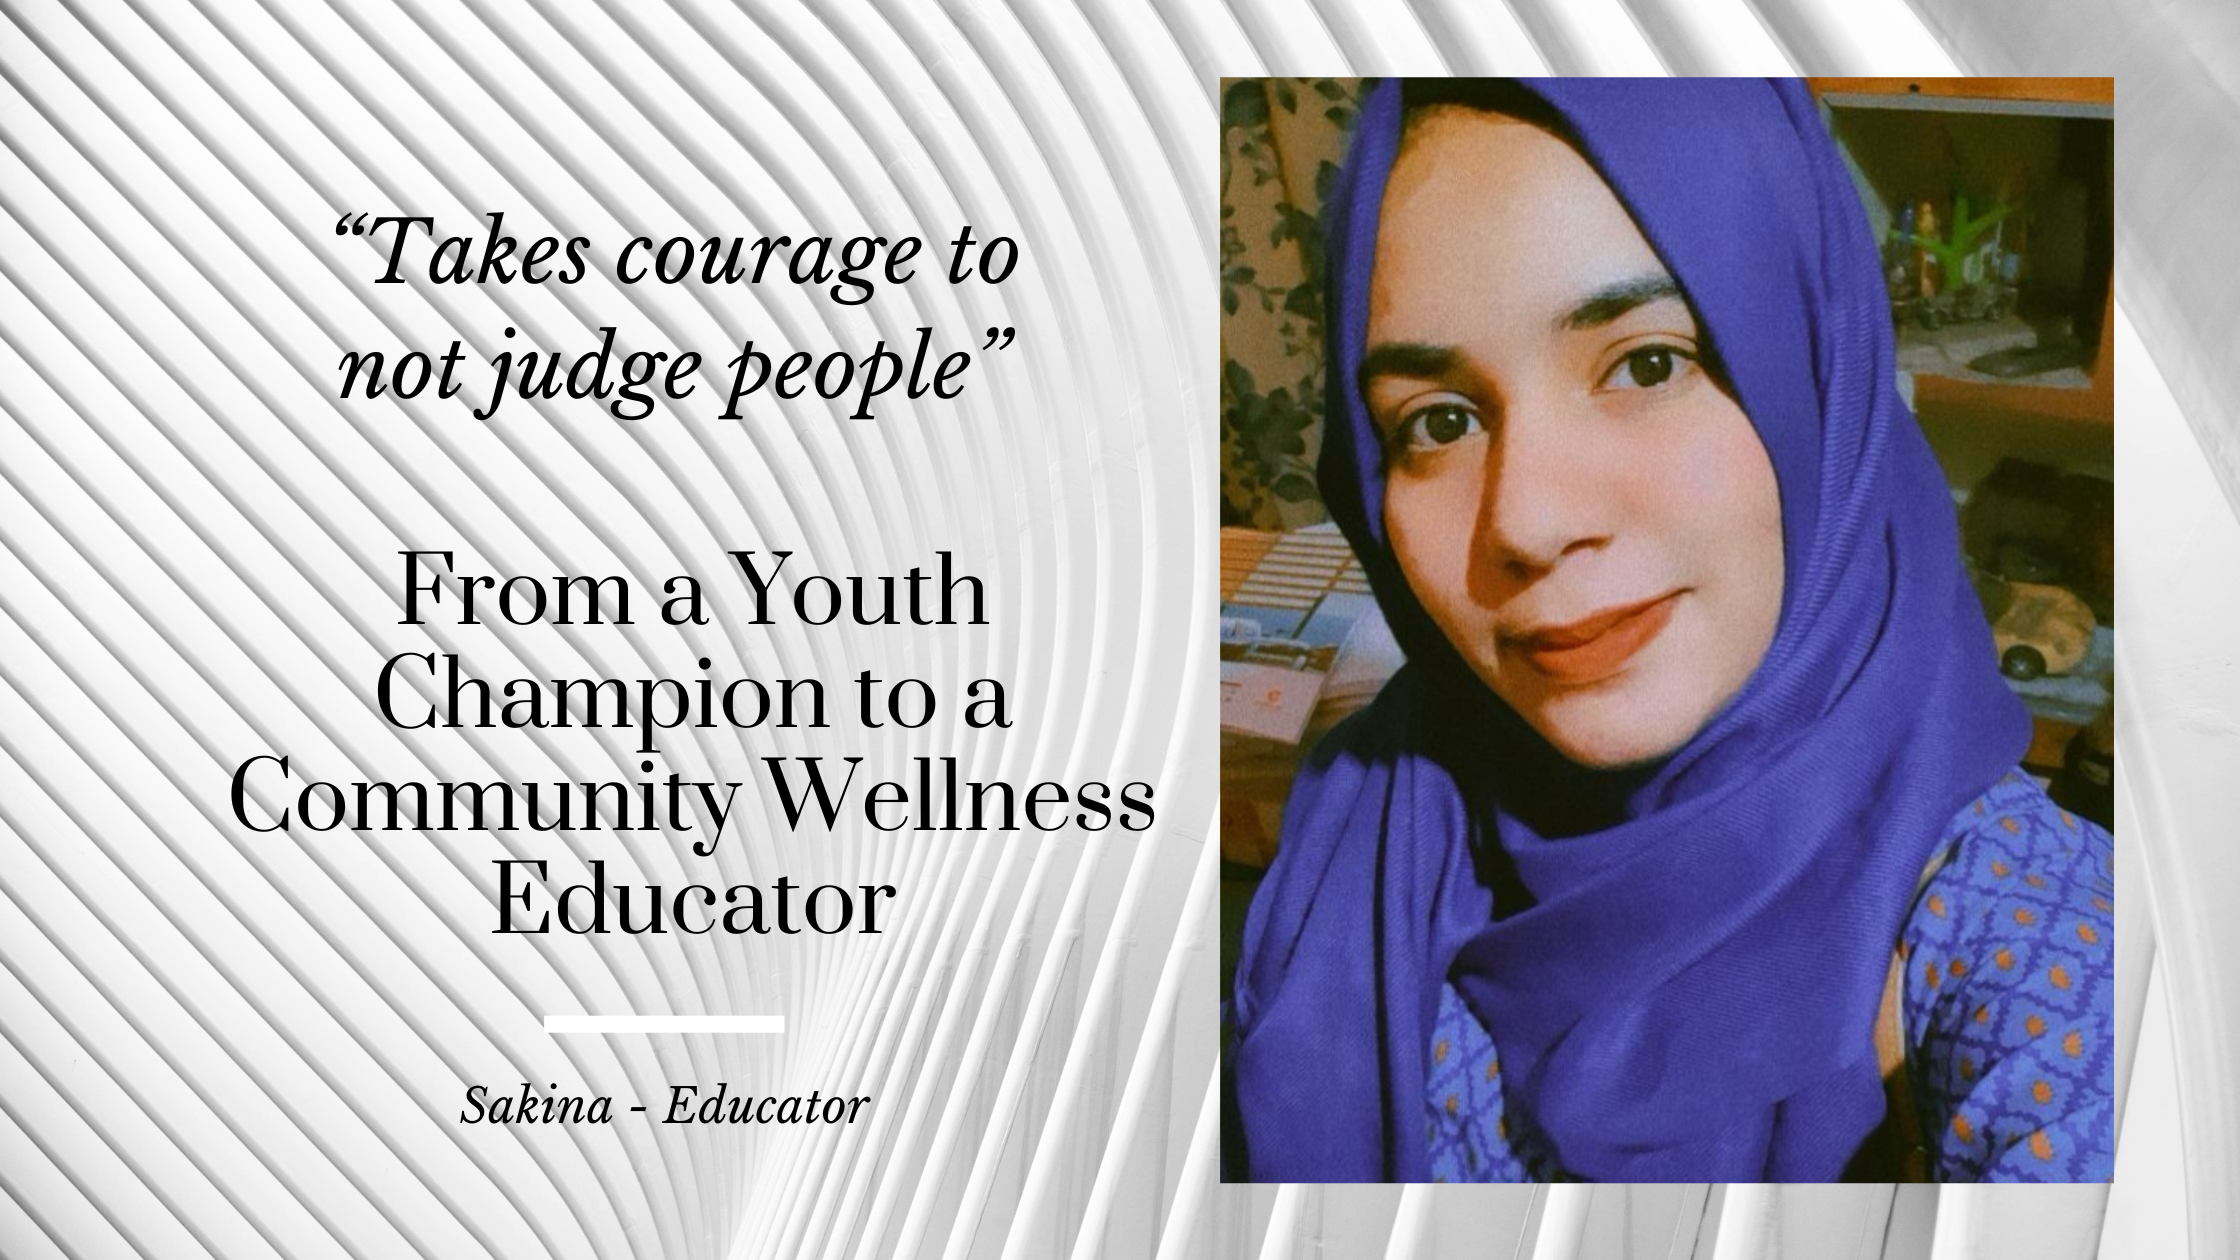 From a Youth Champion to a Community Wellness Educator